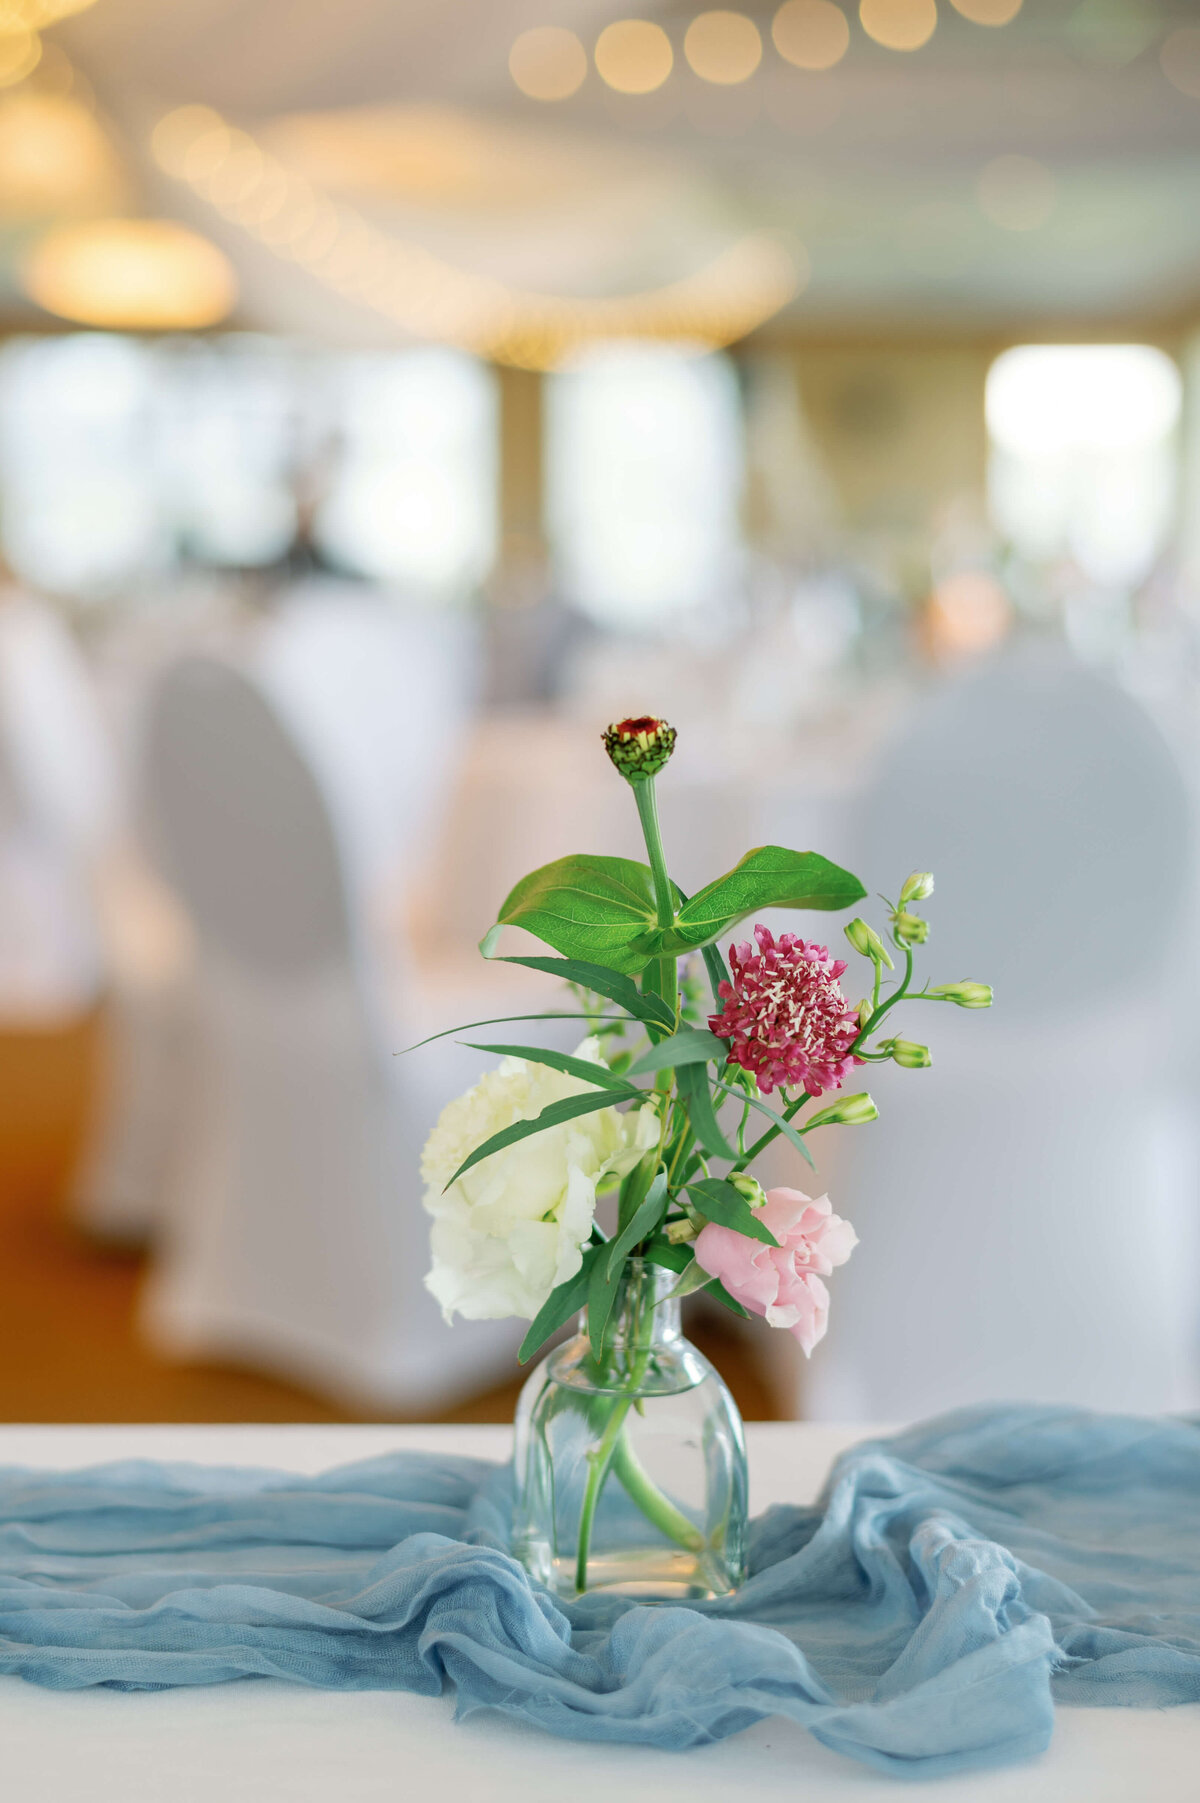 Flowers in a small vase on table with blue runner at Oak Island Resort wedding, Nova Scotia